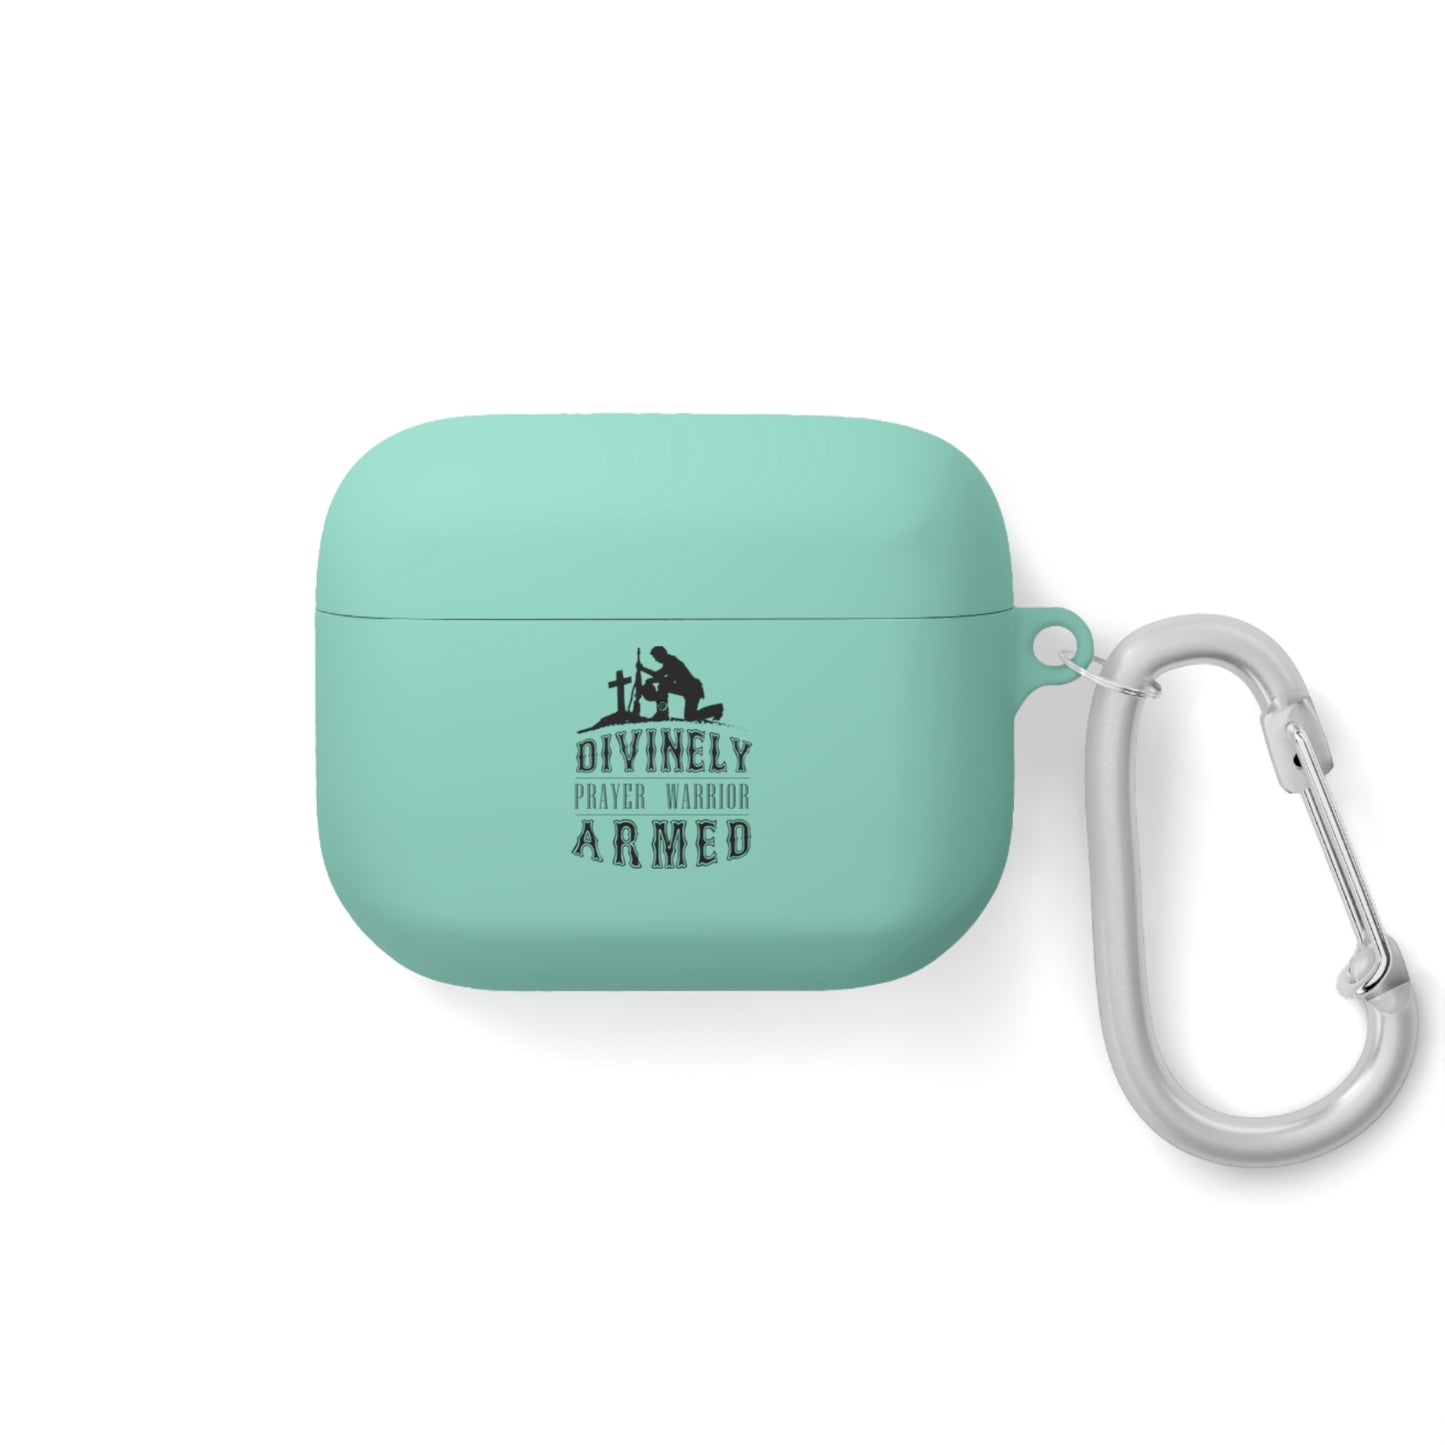 Divinely Armed Prayer Warrior AirPods / Airpods Pro Case cover